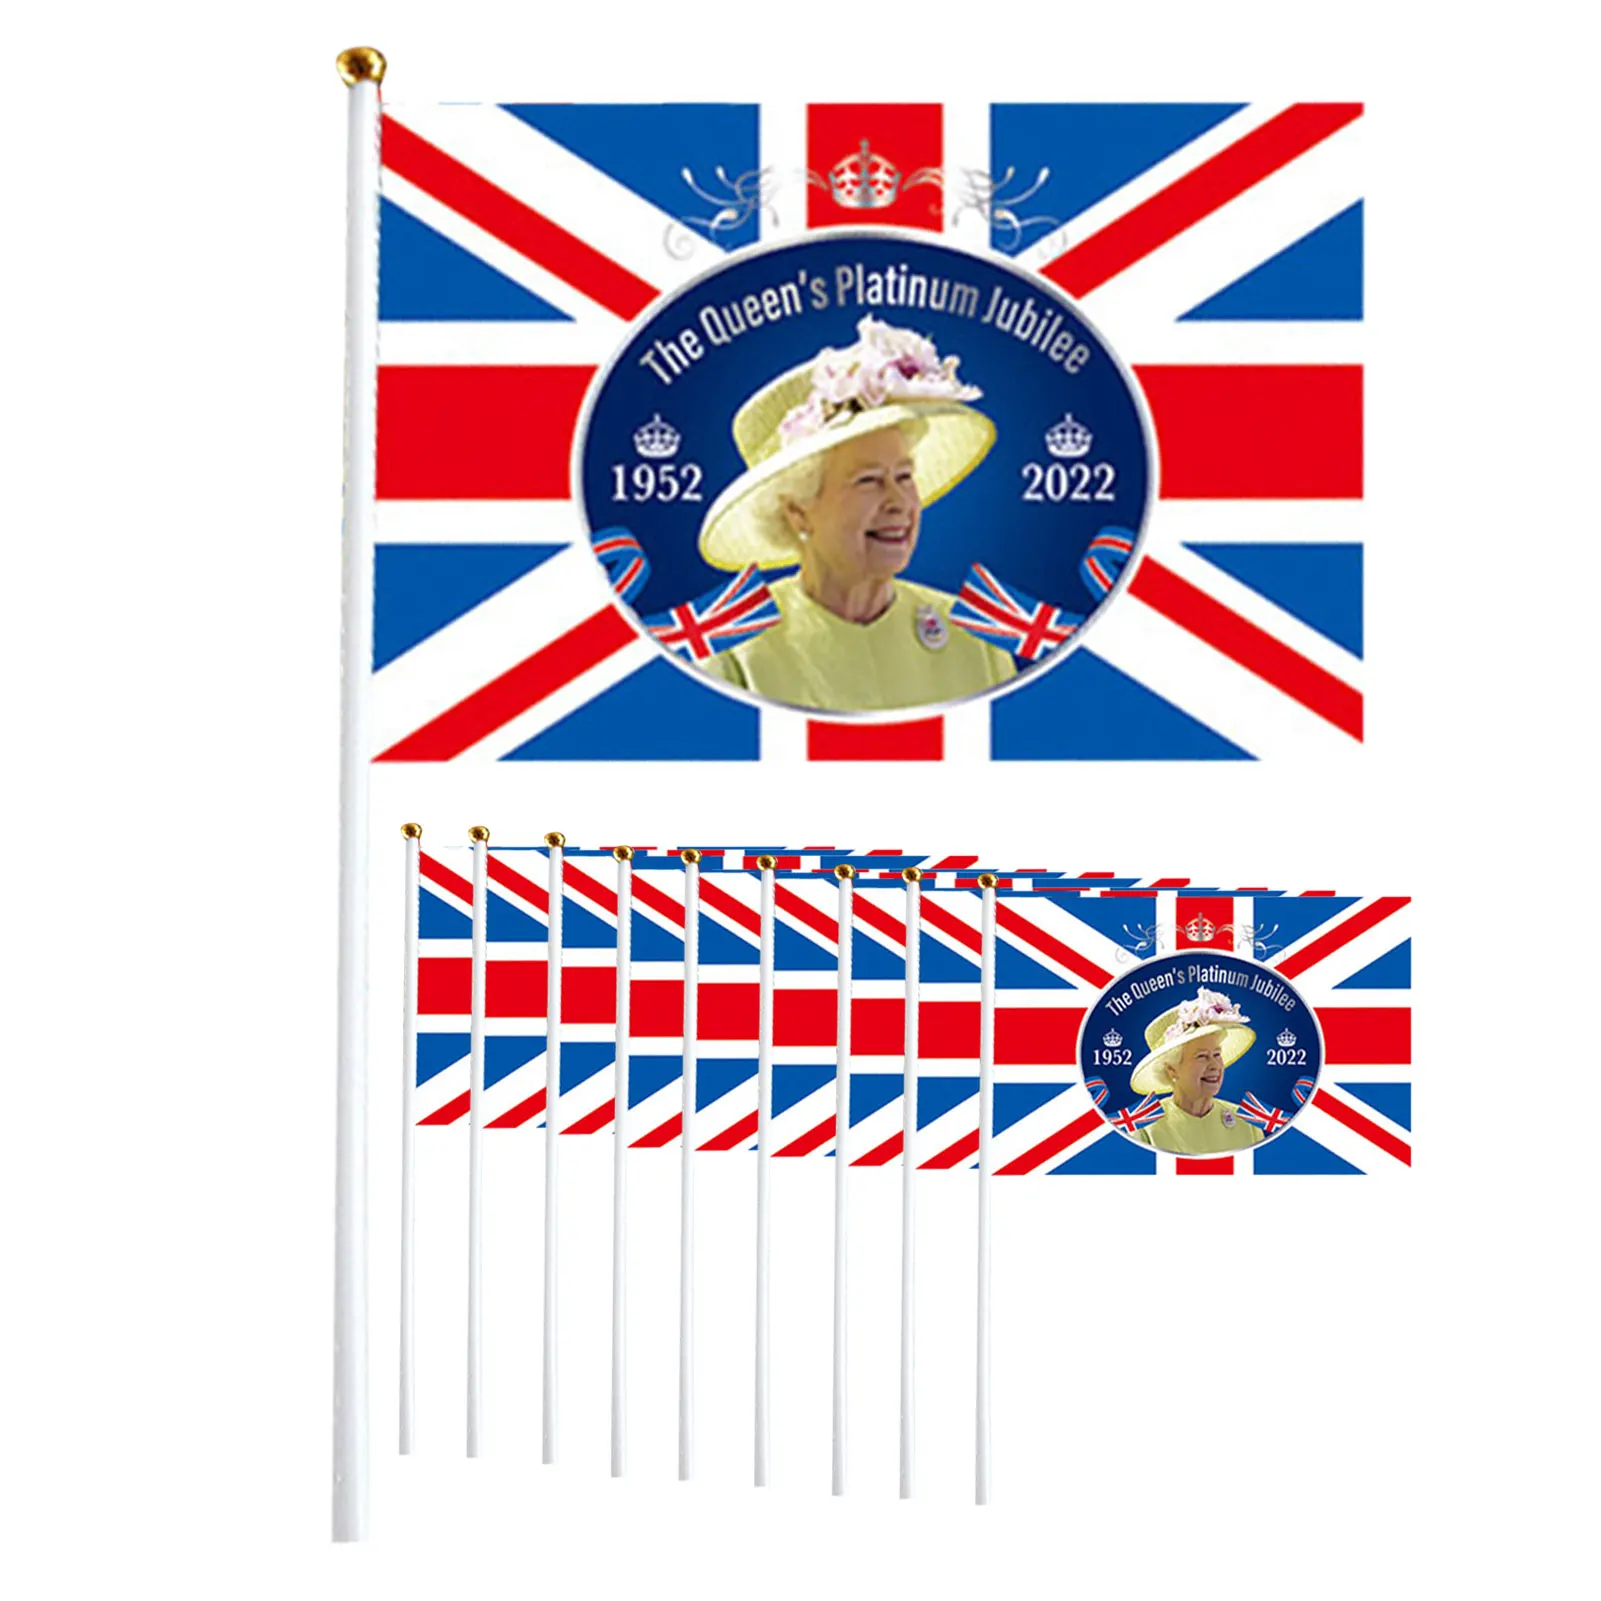 

10pcs/set Queens Plat-inum Jubilee Flags 2022 Union Jack Hand Waving Flag Featuring Her Majesty The Queen 70th Anniversary